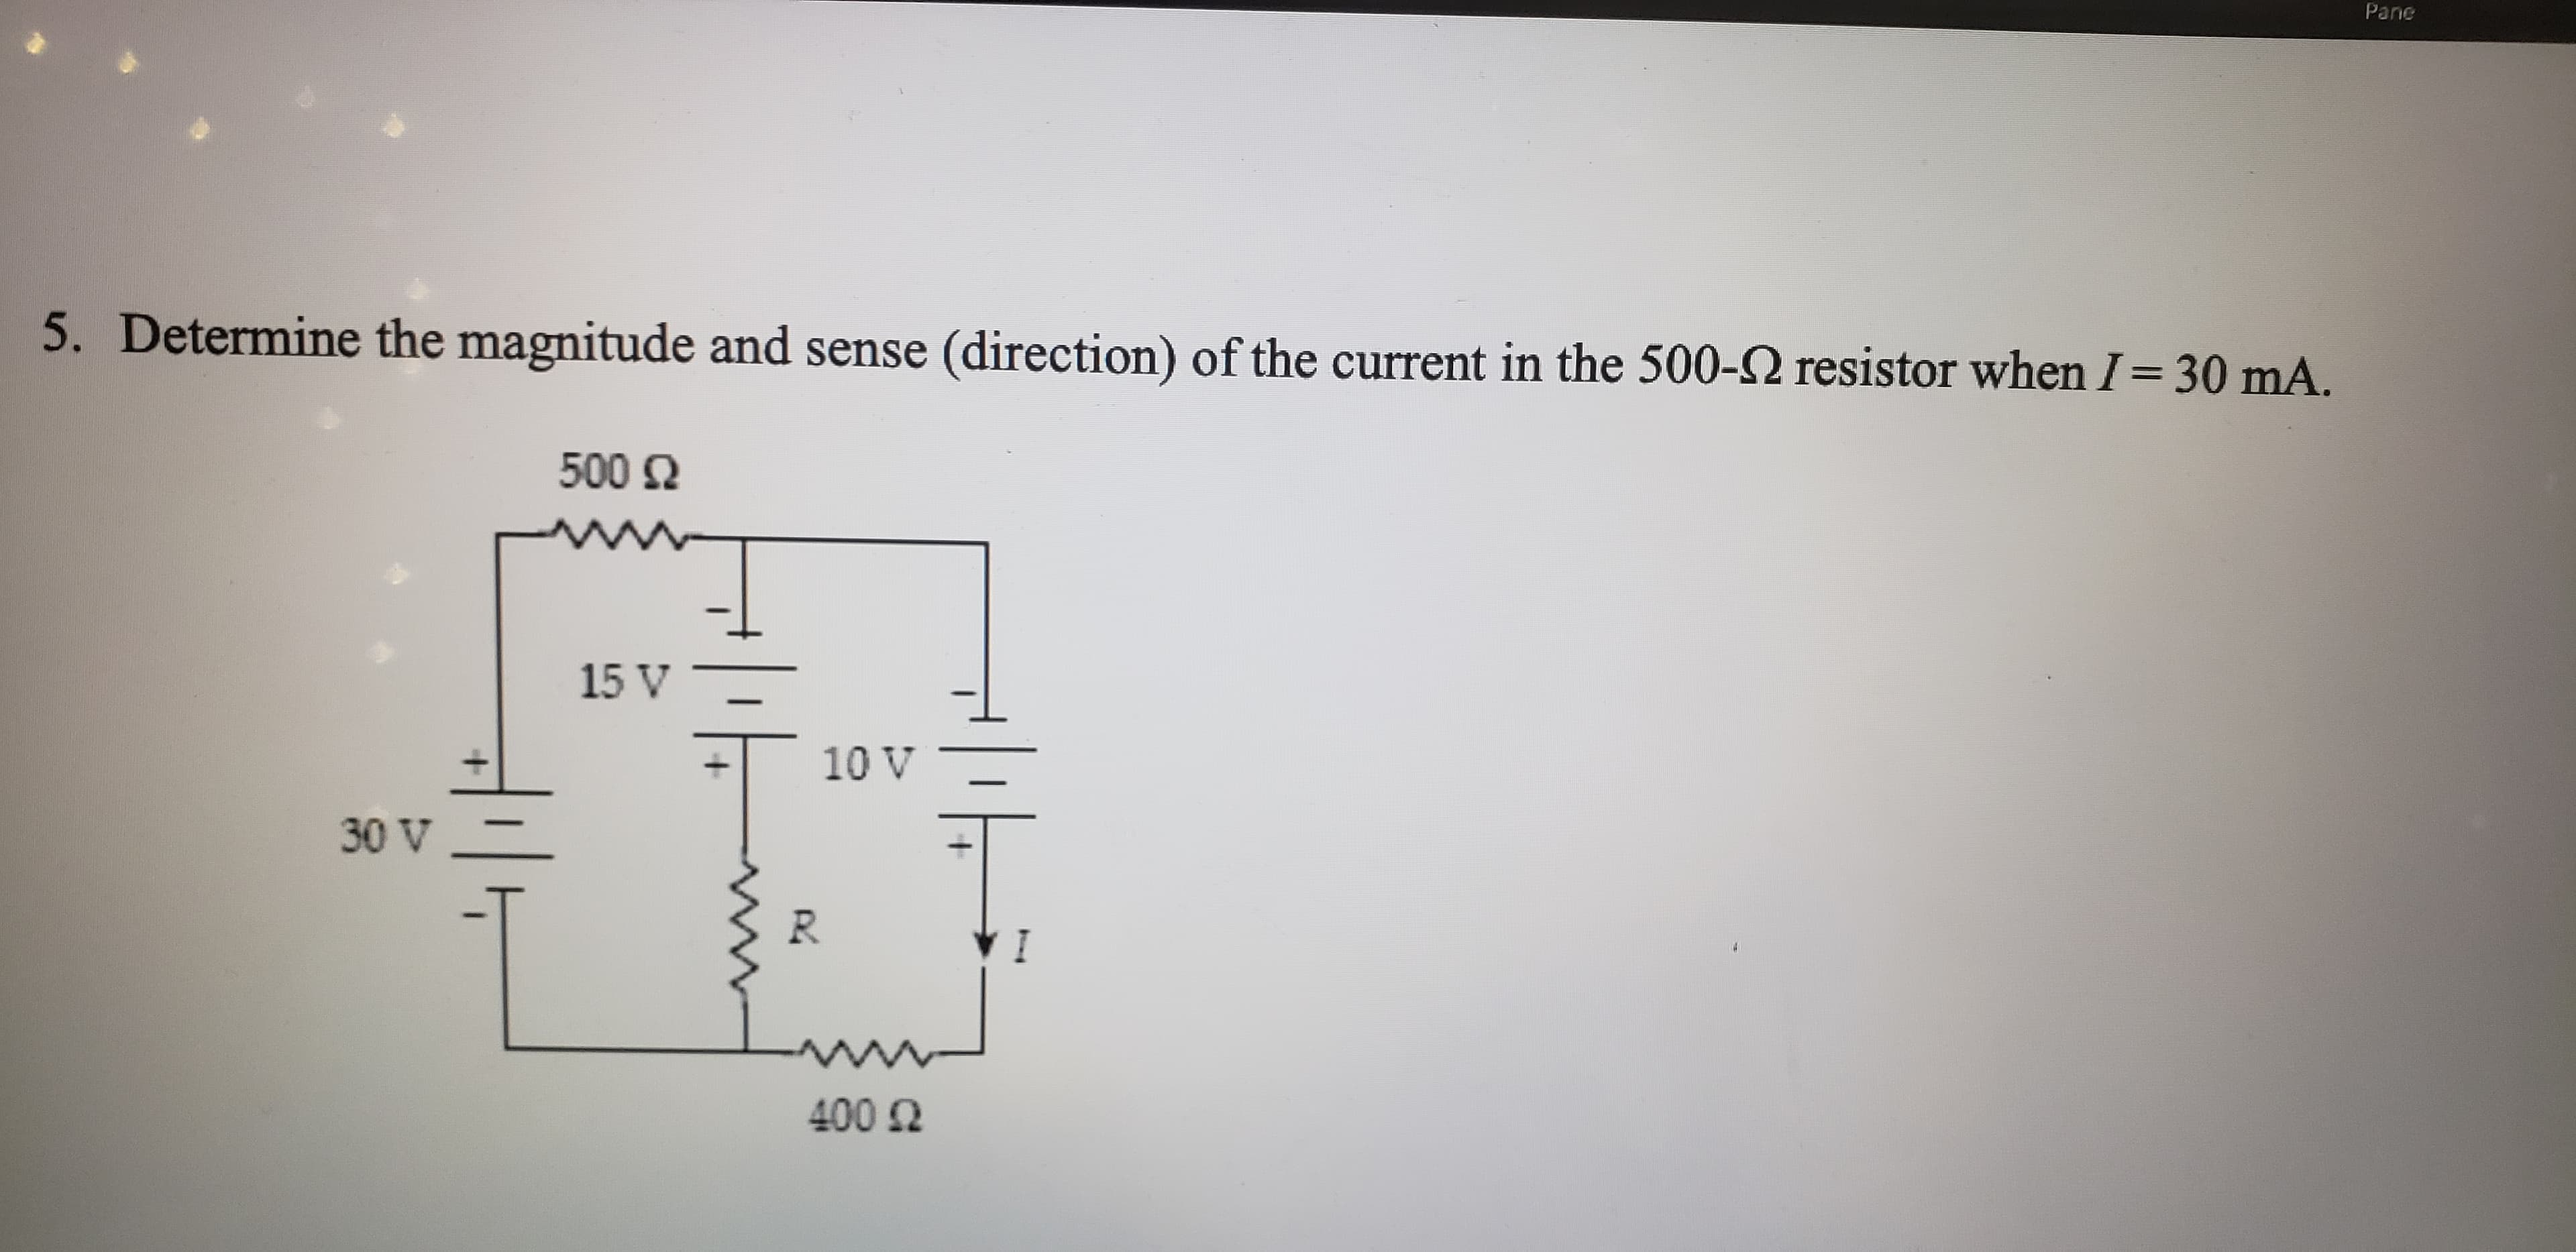 Determine the magnitude and sense (direction) of the current in the 500-2 resistor when I= 30 mA.
500 2
15 V
10 V
30 V
R.
IA
400 0
